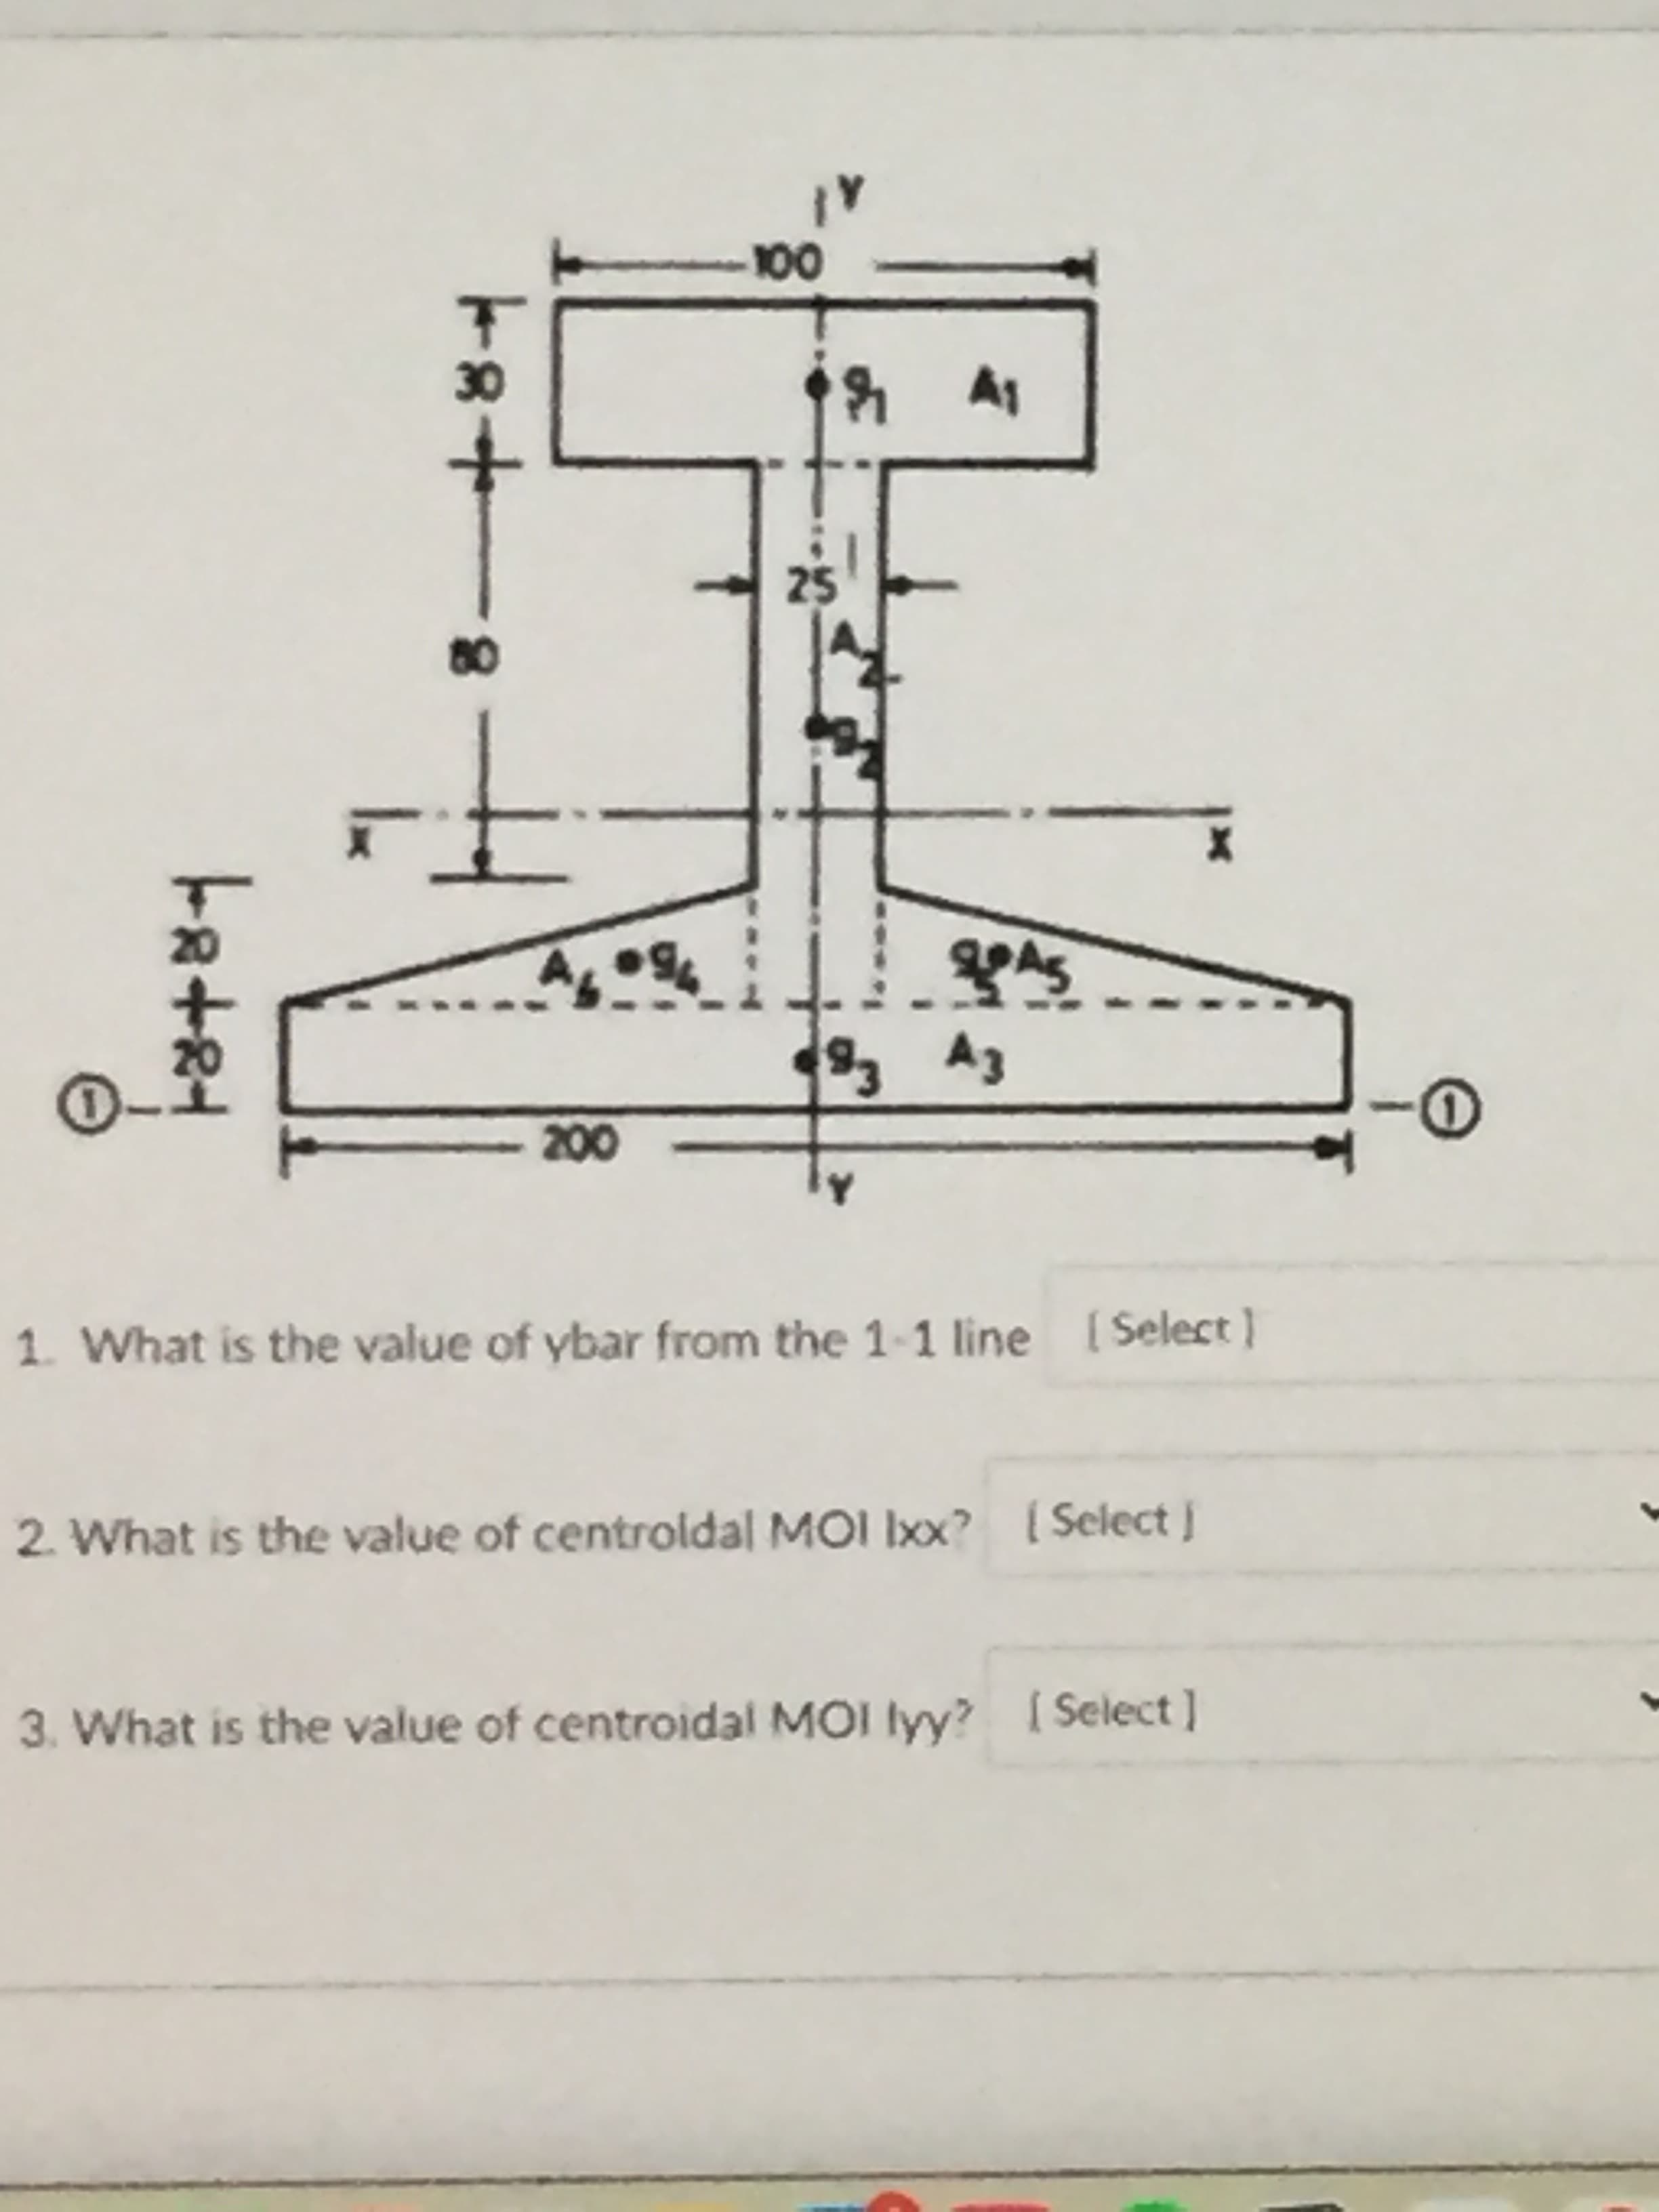 8+81
al
25
Ey Eg
1. What is the value of ybar from the 1-1 line [Select }
2. What is the value of centroldal MOI Ixx? Select J
3. What is the value of centroidal MOI lyy? [Select]
